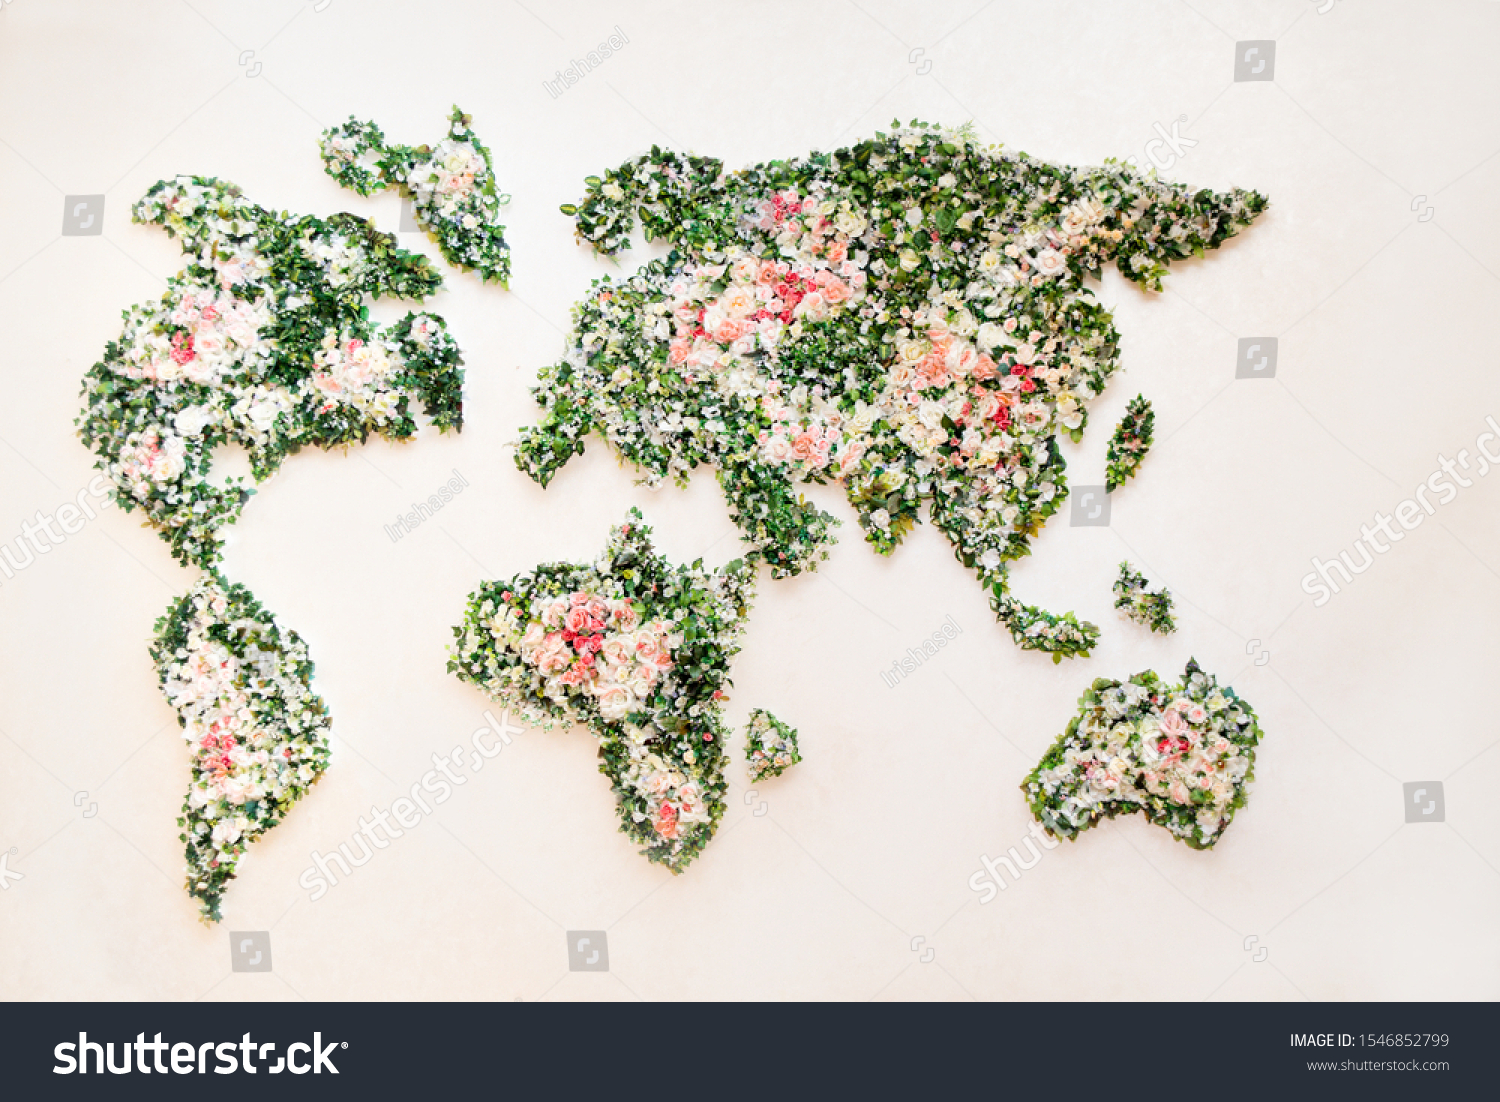 Stock Photo Map Of World Made From Different Kinds Of Flowers World Map On A White Wall In The Interior Made 1546852799 